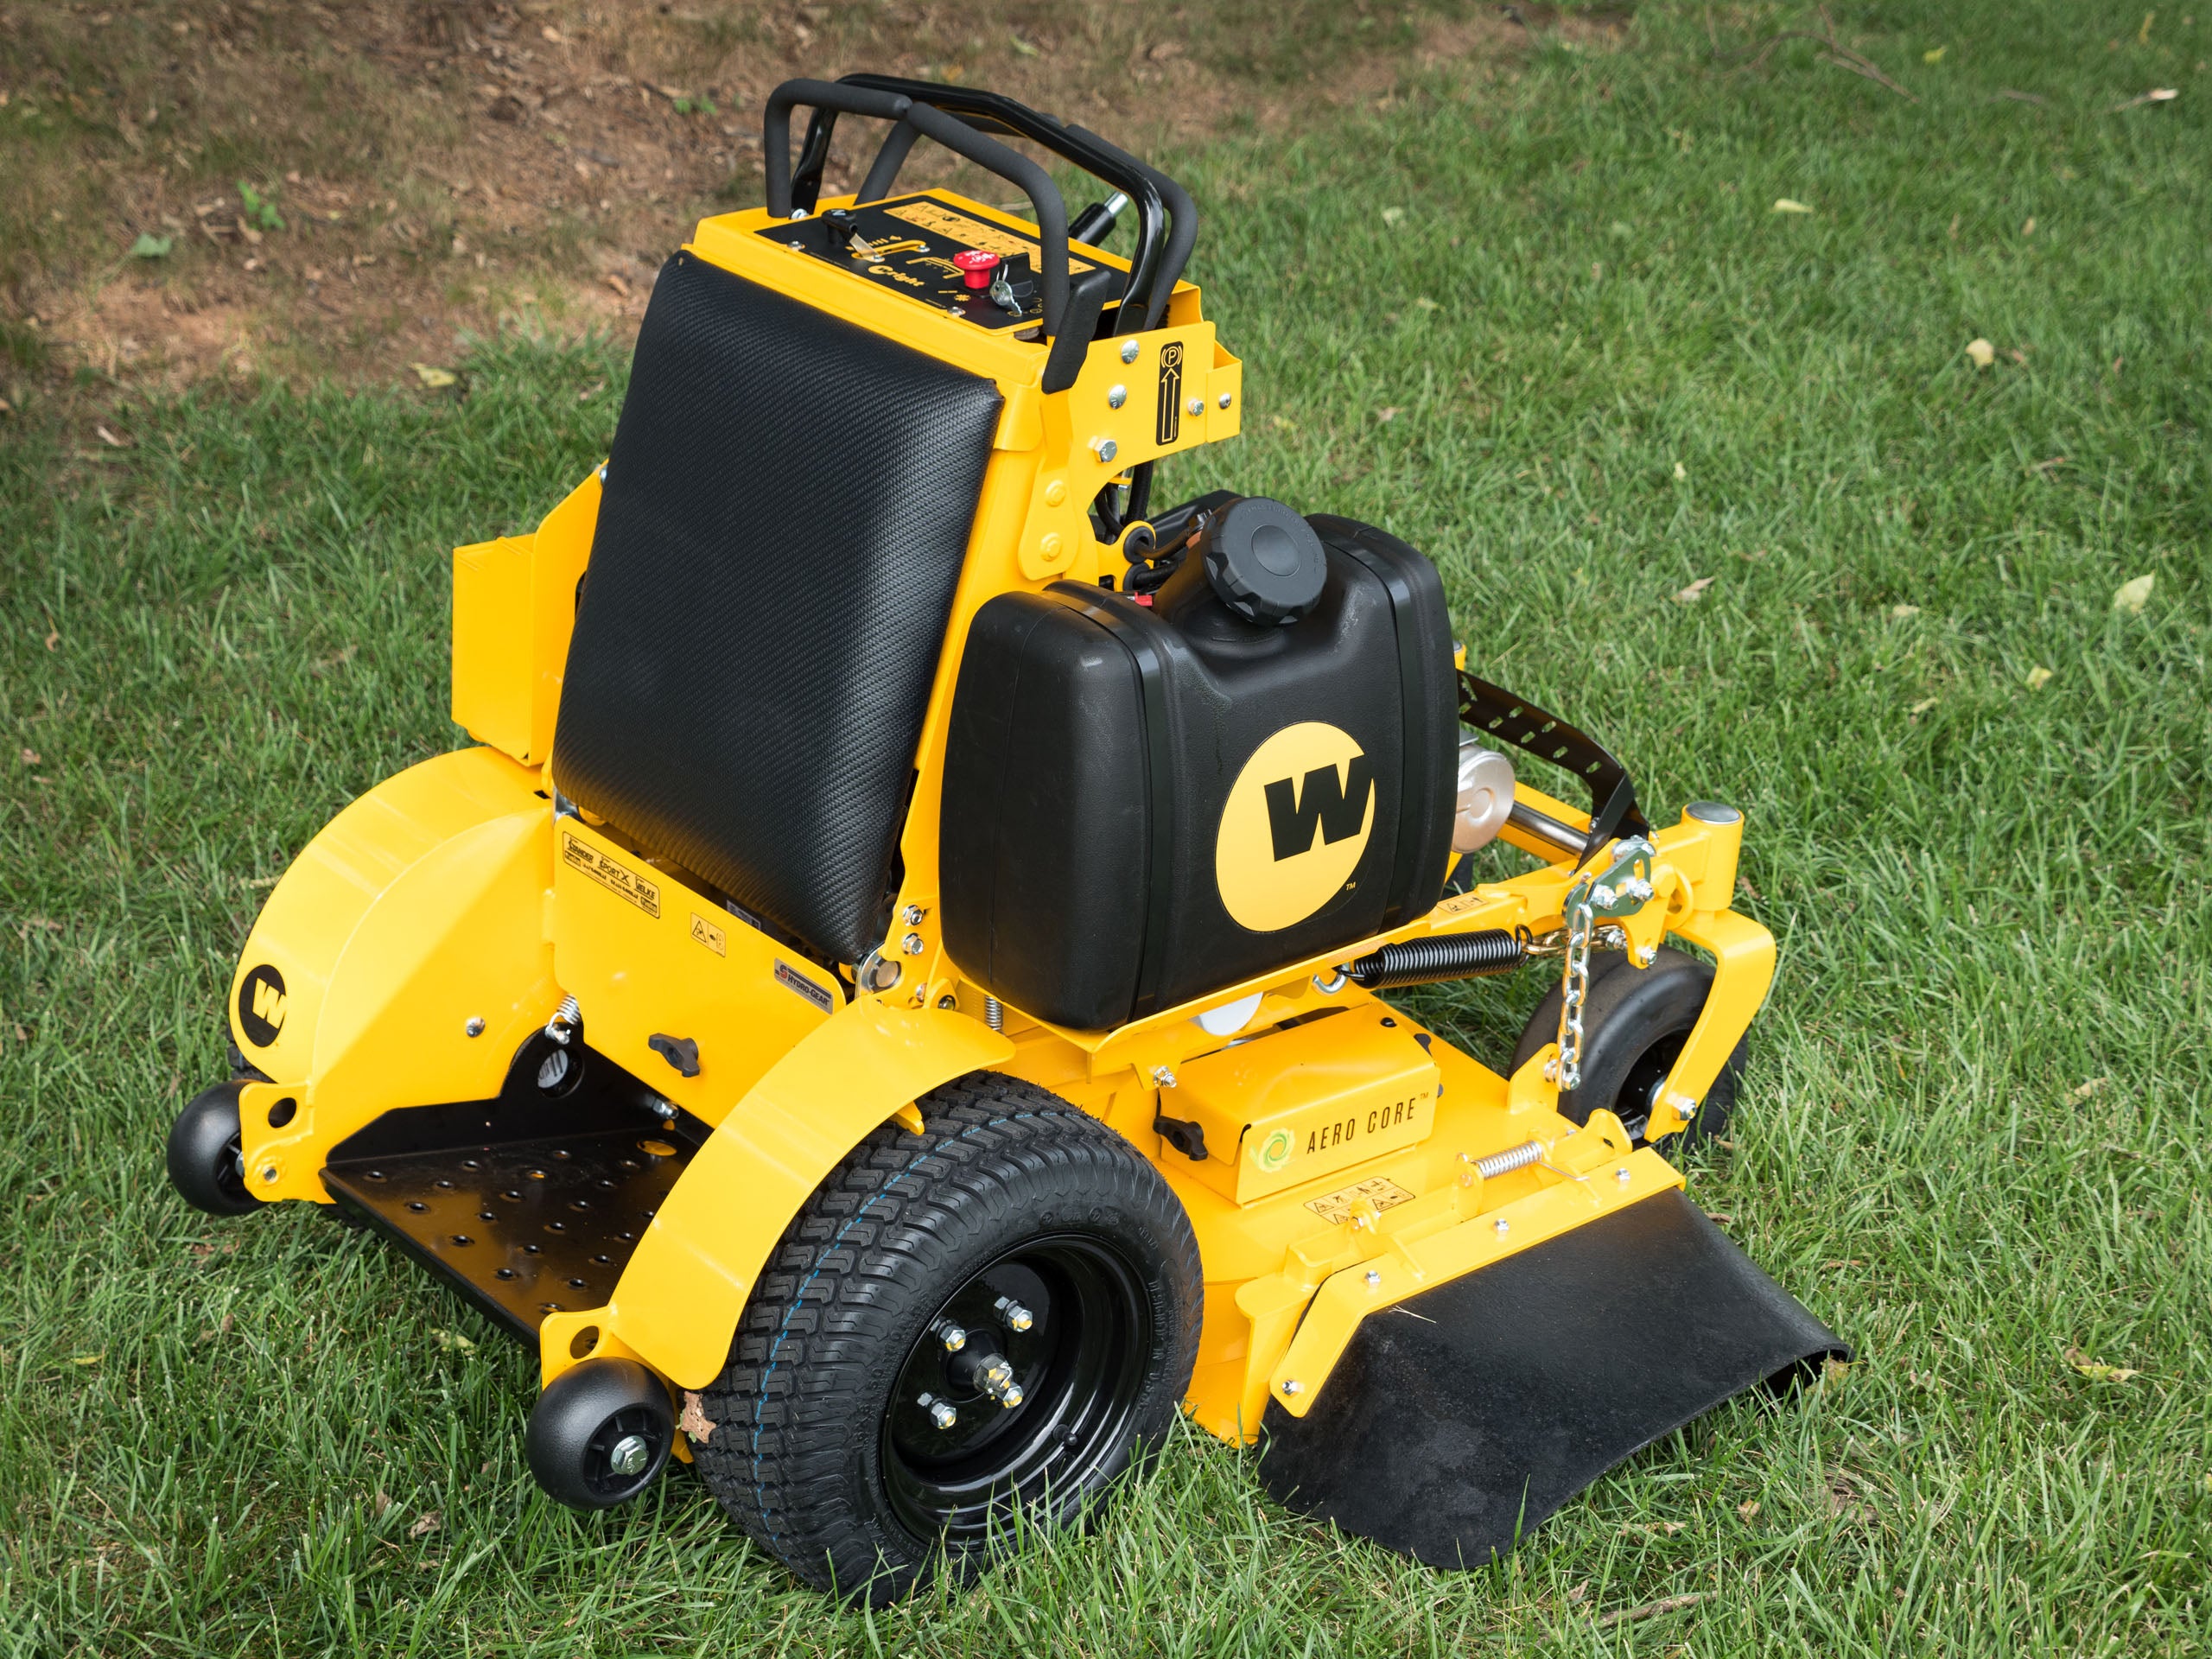 COX Commercial Mowers The Stander® I stand on mower, photo of rear/side profile showing Aero Core deck